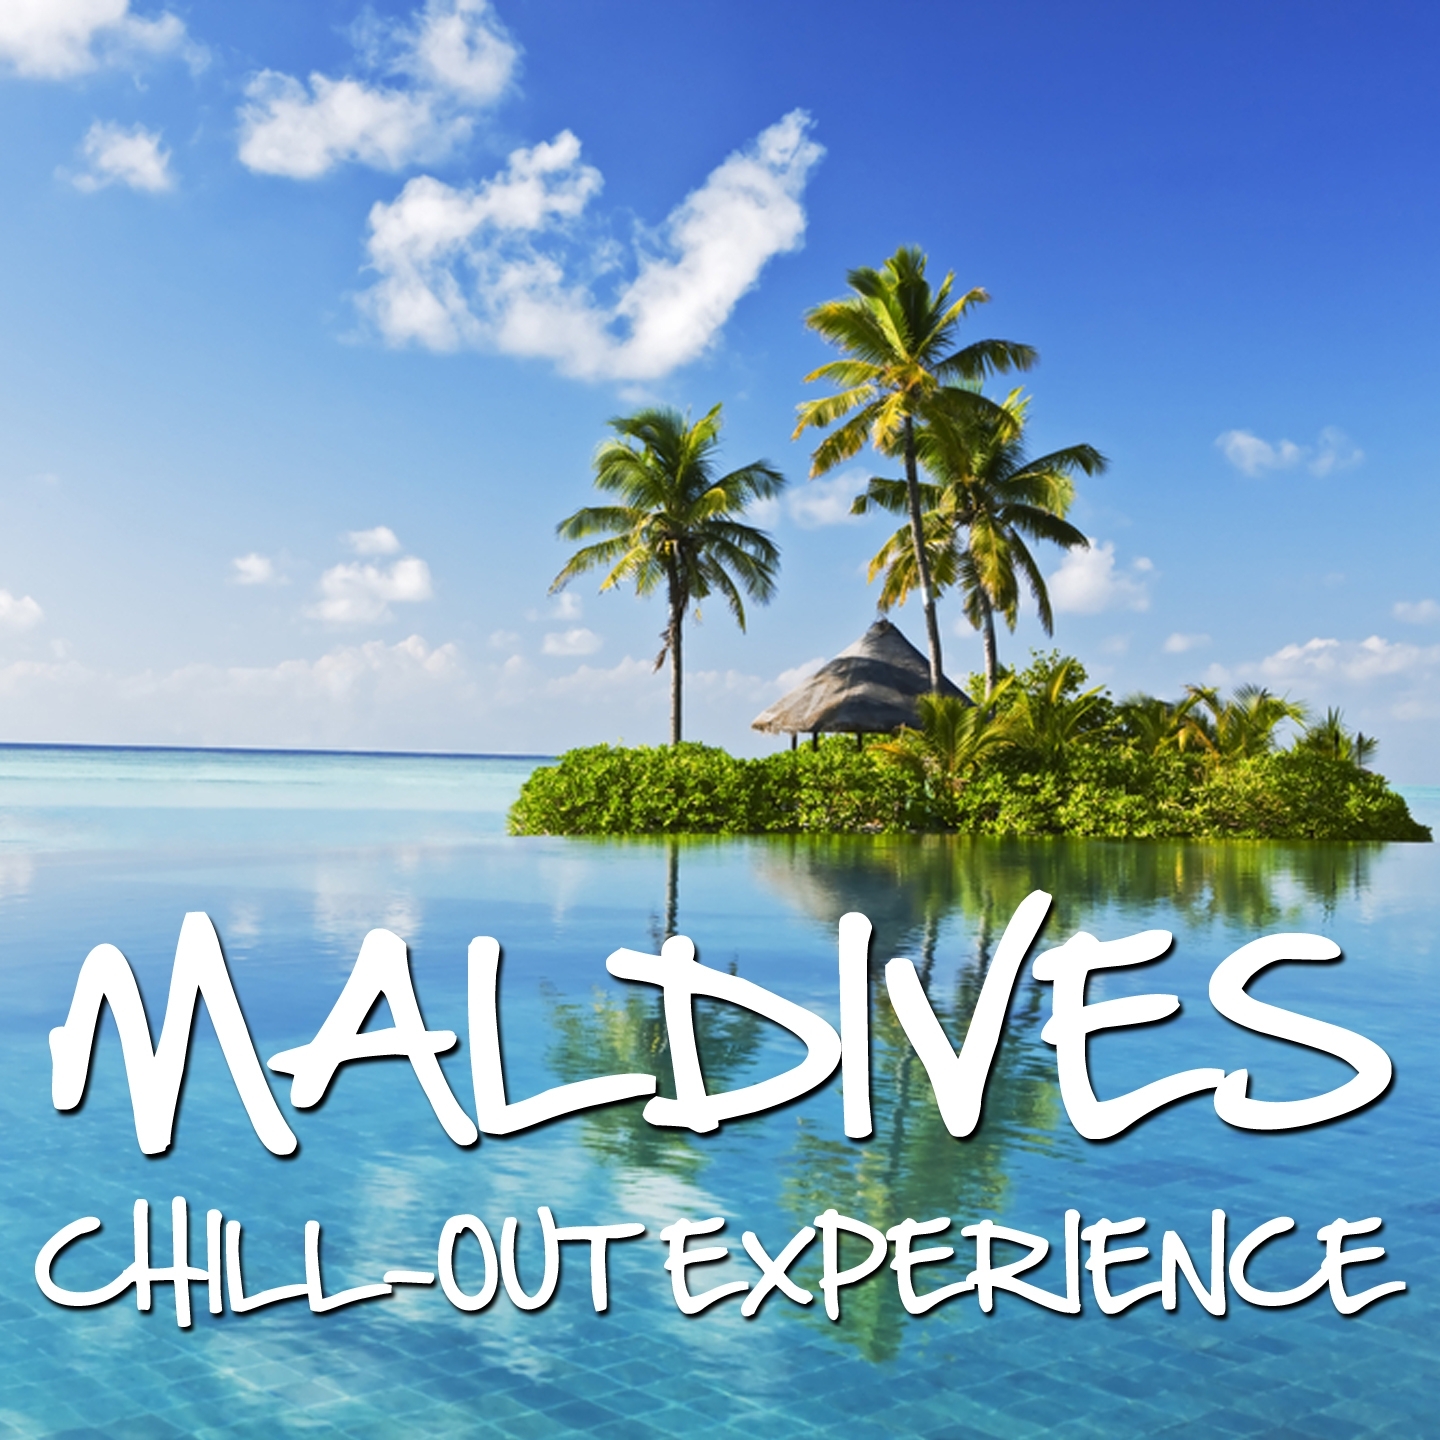 Maldives Chill Out Expierence